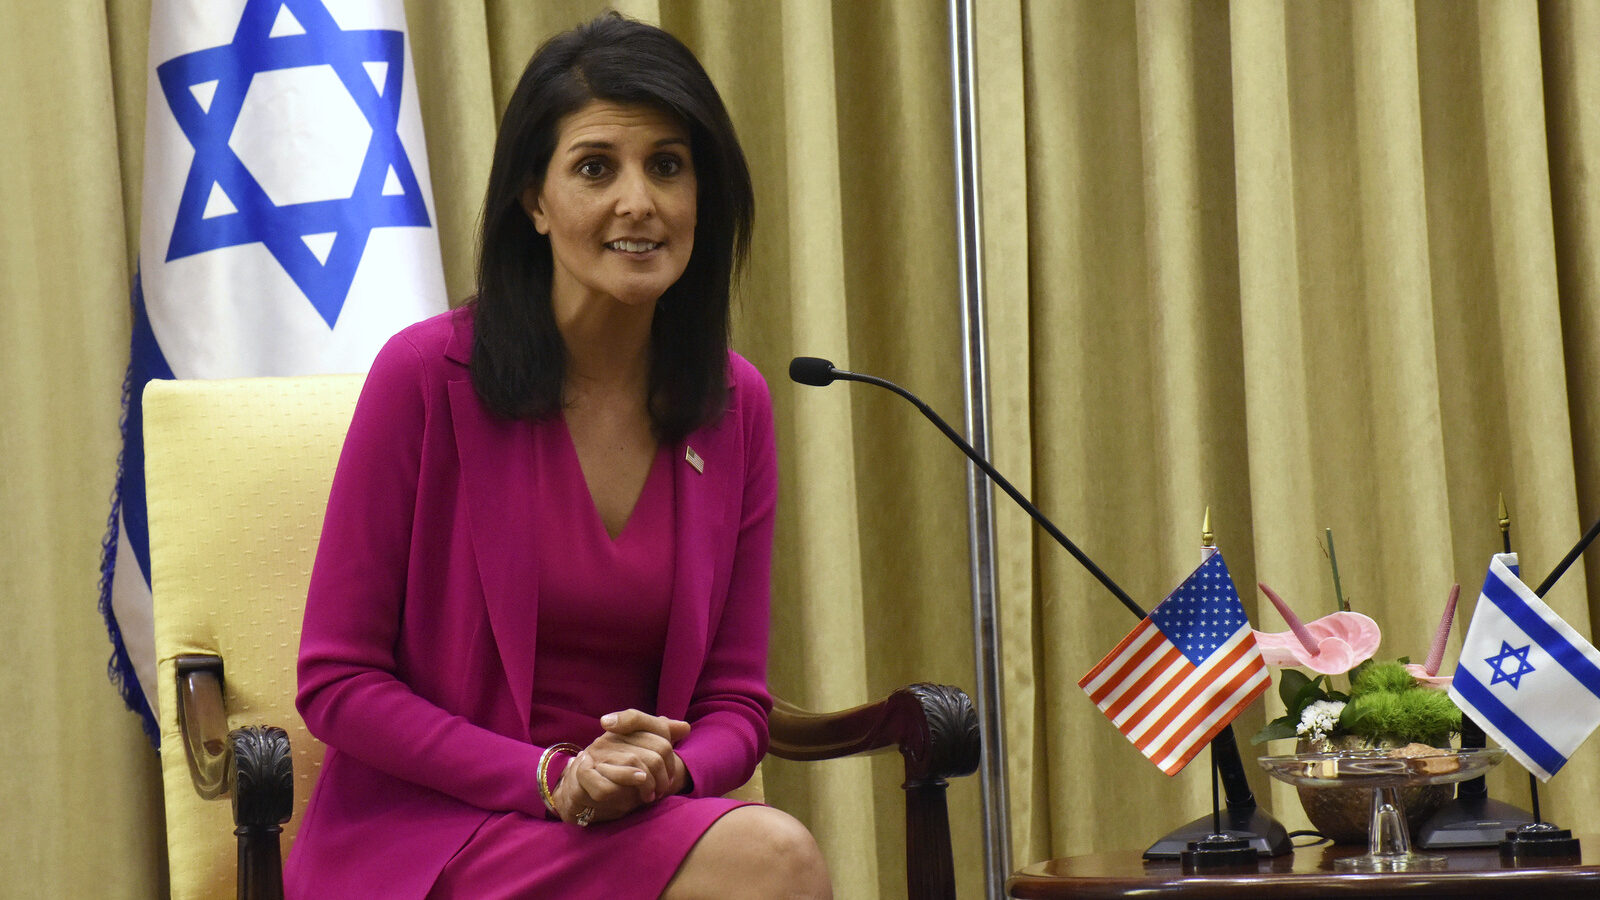 U.S. Ambassador to the United Nations Nikki Haley speaks during a meeting with Israeli President Reuven Rivlin, not seen, in his residence in Jerusalem, Israel, June 7, 2017. (Debbie Hill/AP)